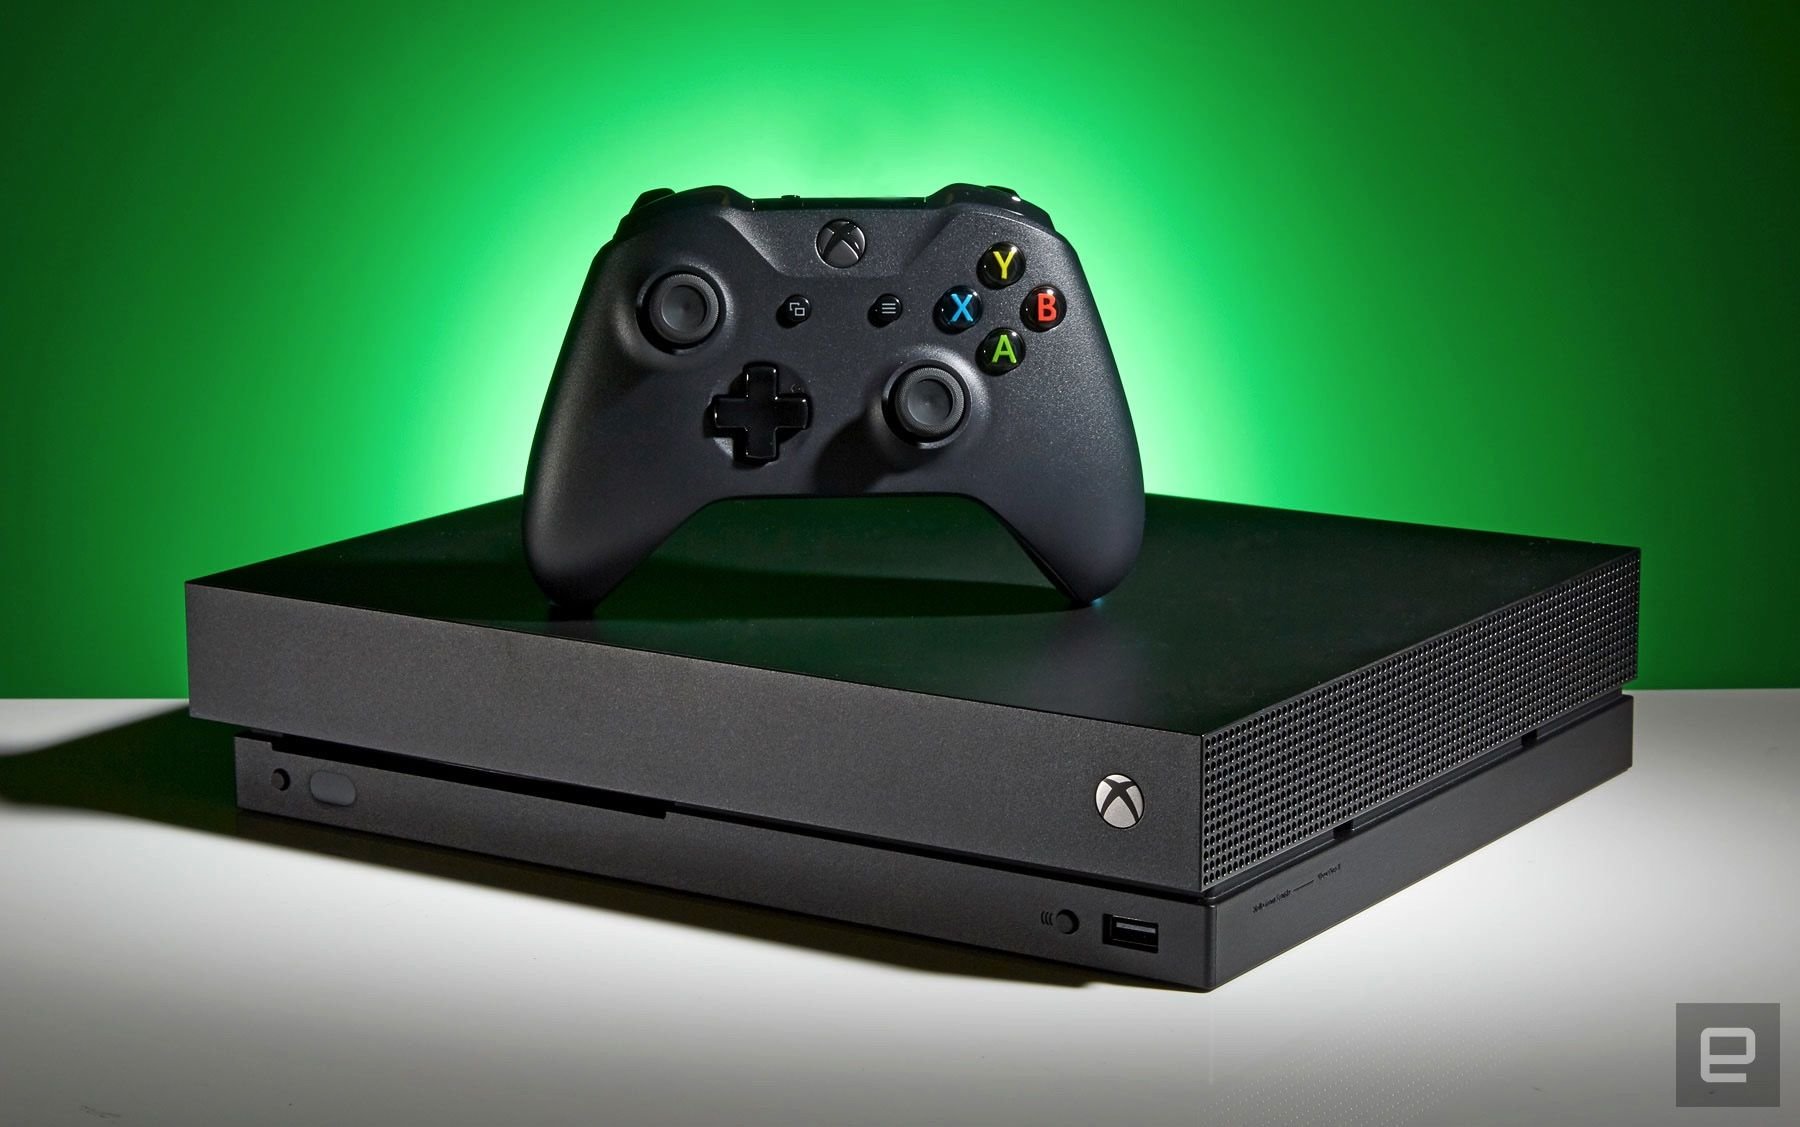 How To Cast To Xbox One From Pc/Mac/Android - Kodi Xbox Blog
